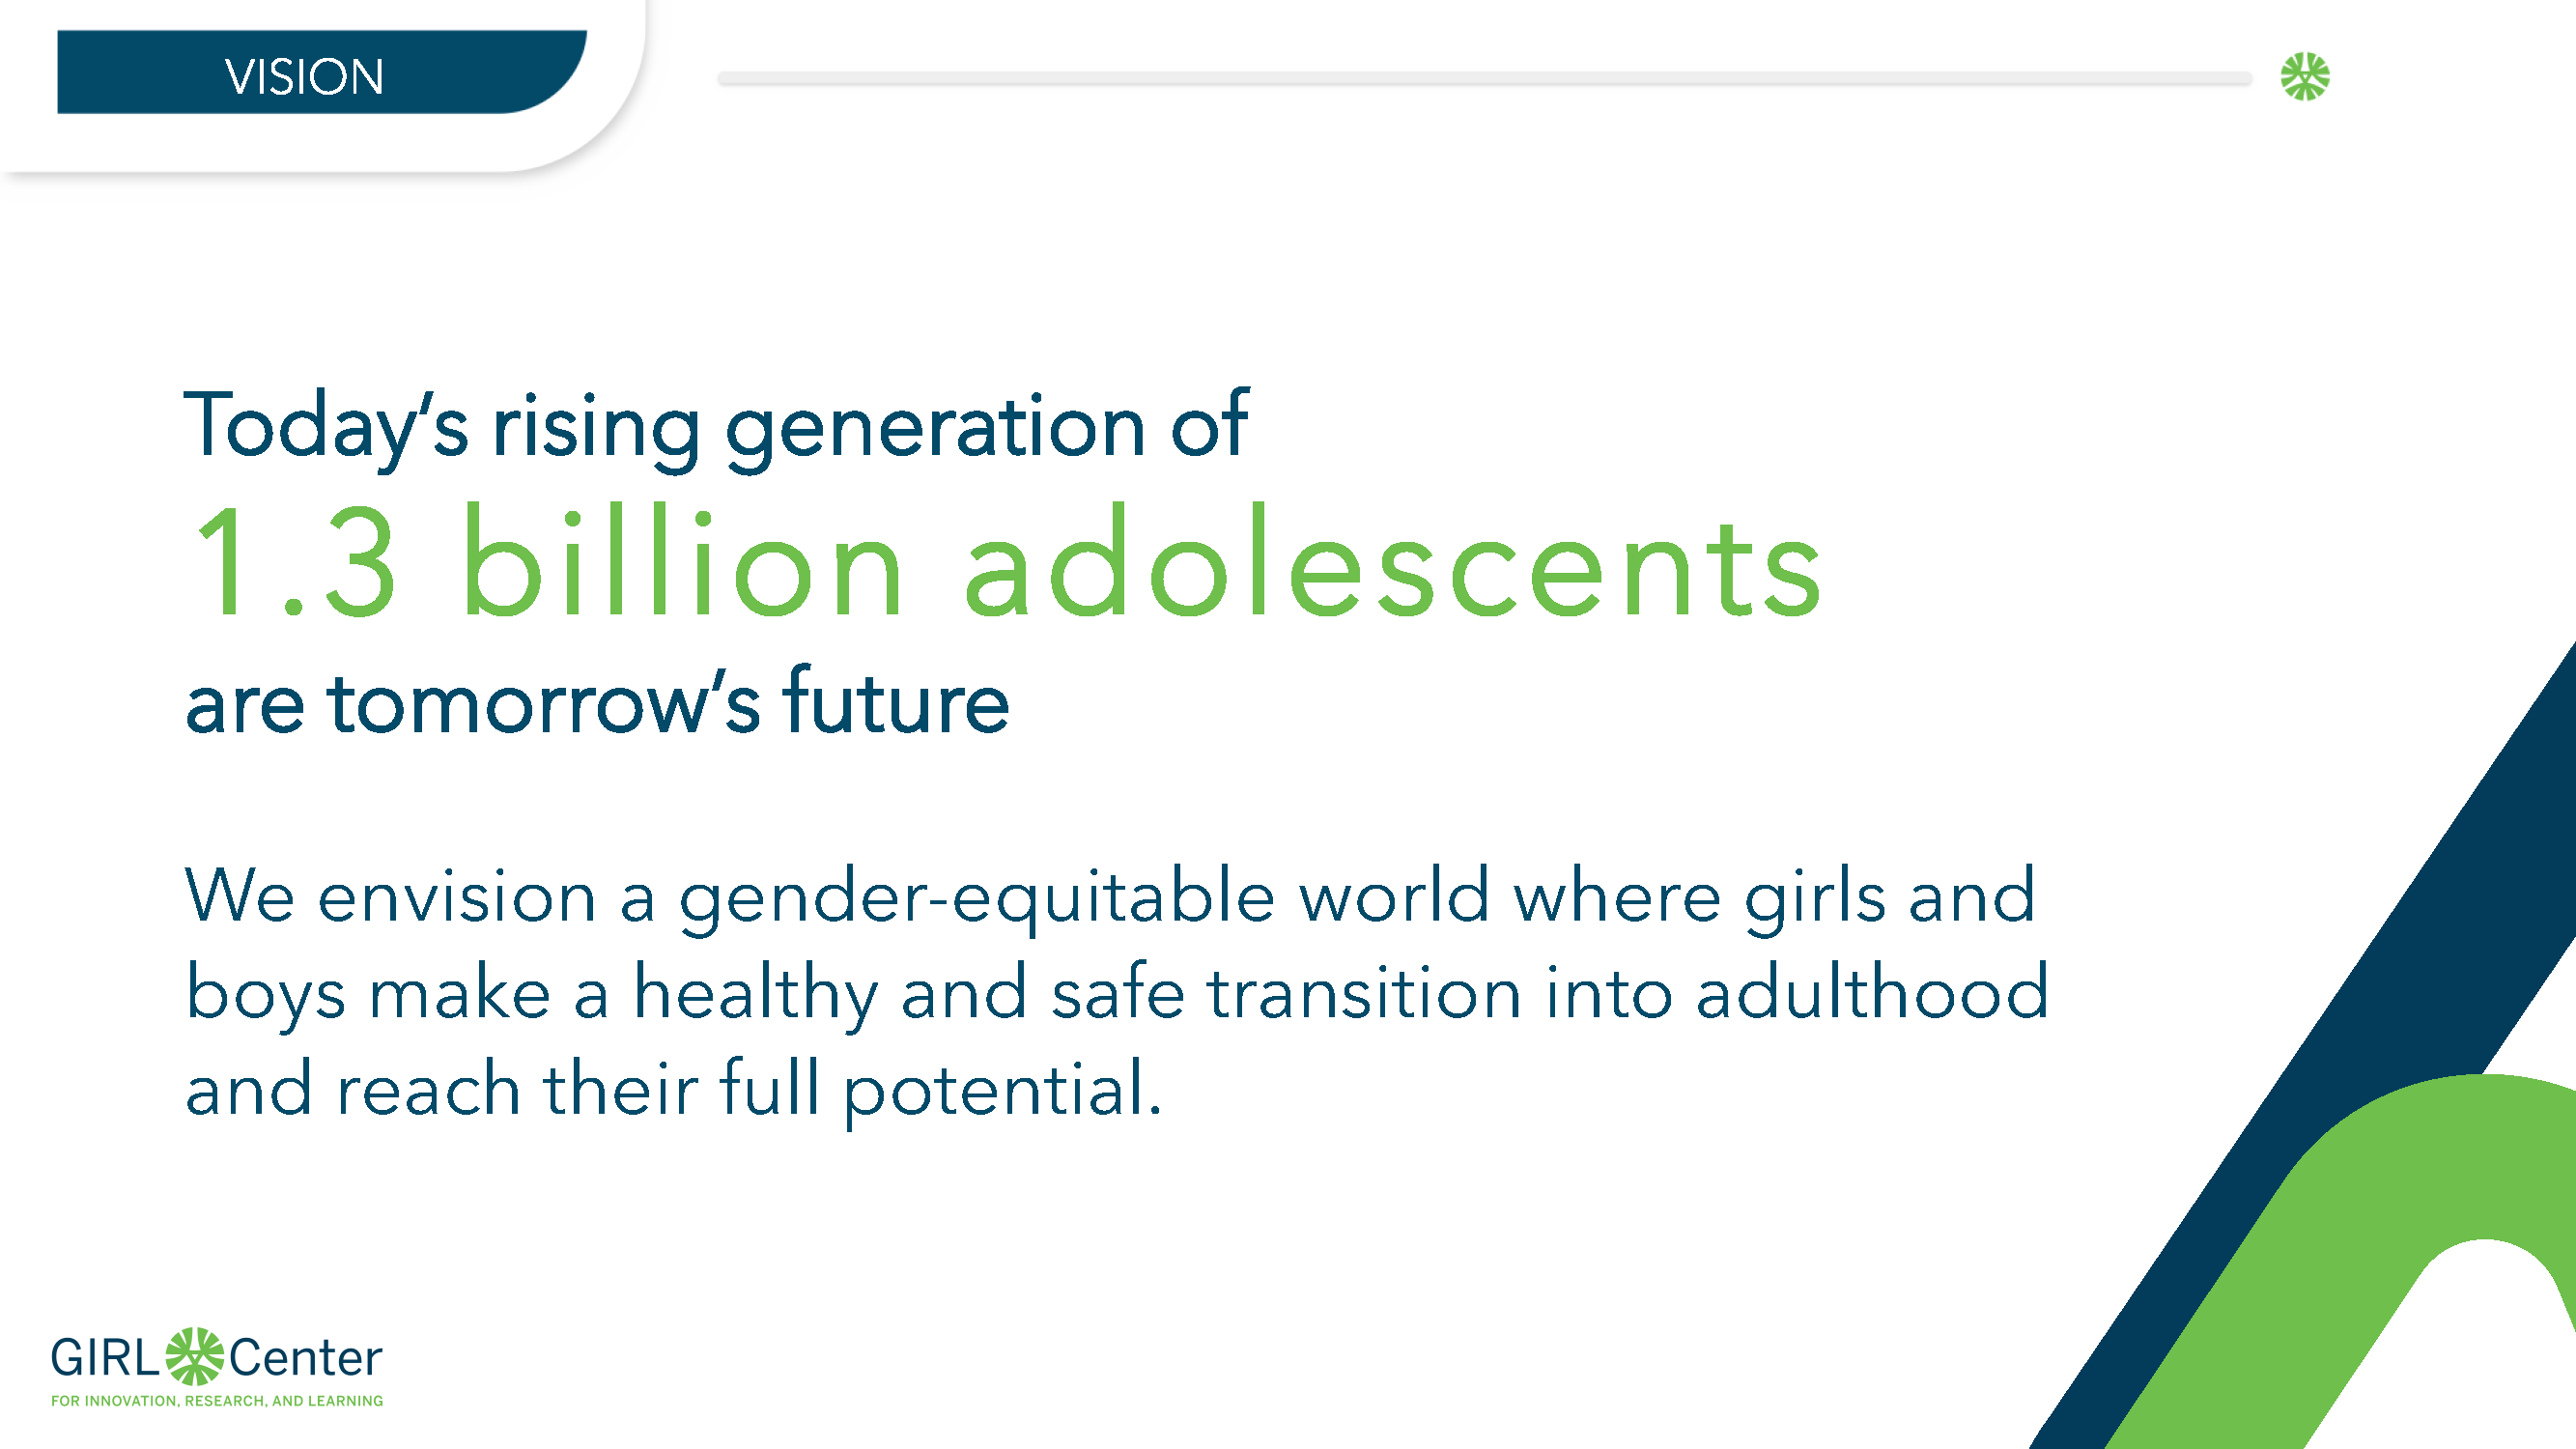 Today's rising generation of 1.3 billion adolescents are tomorrow's future. We envision a gender-equitable world where girls and boys make a healthy and safe transition into adulthood and reach their full potential.